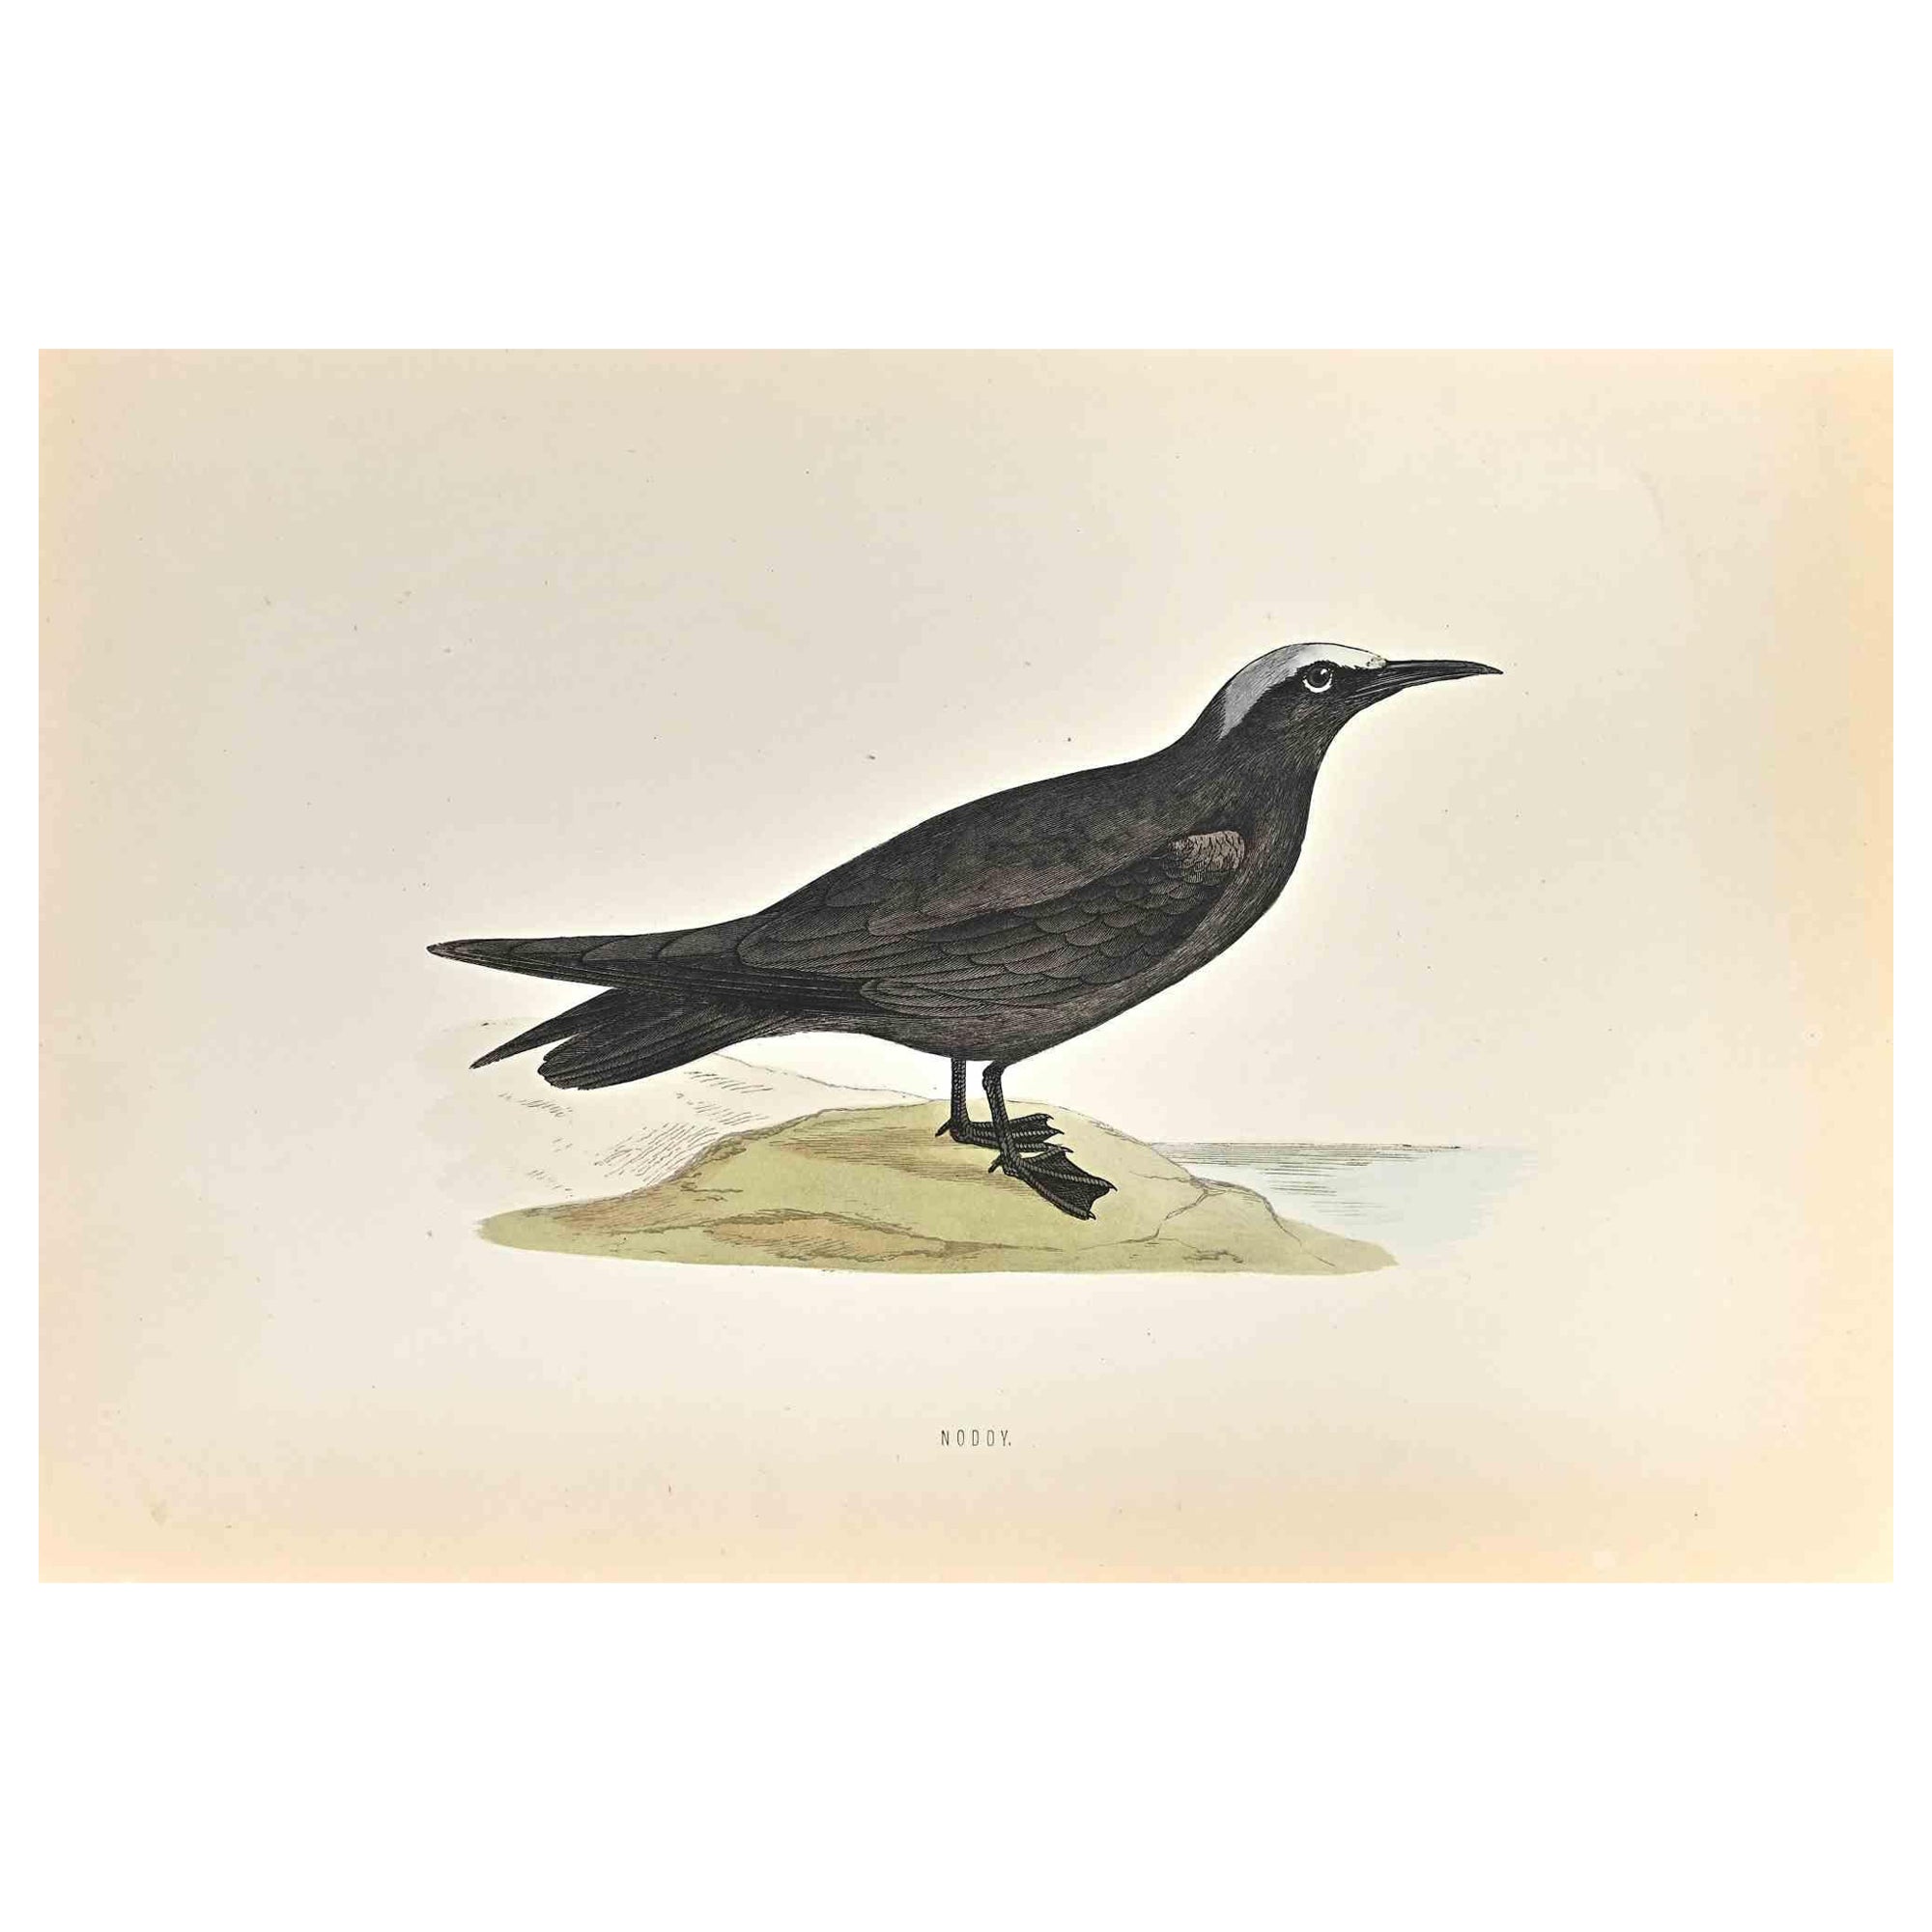 Noddy is a modern artwork realized in 1870 by the British artist Alexander Francis Lydon (1836-1917) . 

Woodcut print, hand colored, published by London, Bell & Sons, 1870.  Name of the bird printed in plate. This work is part of a print suite